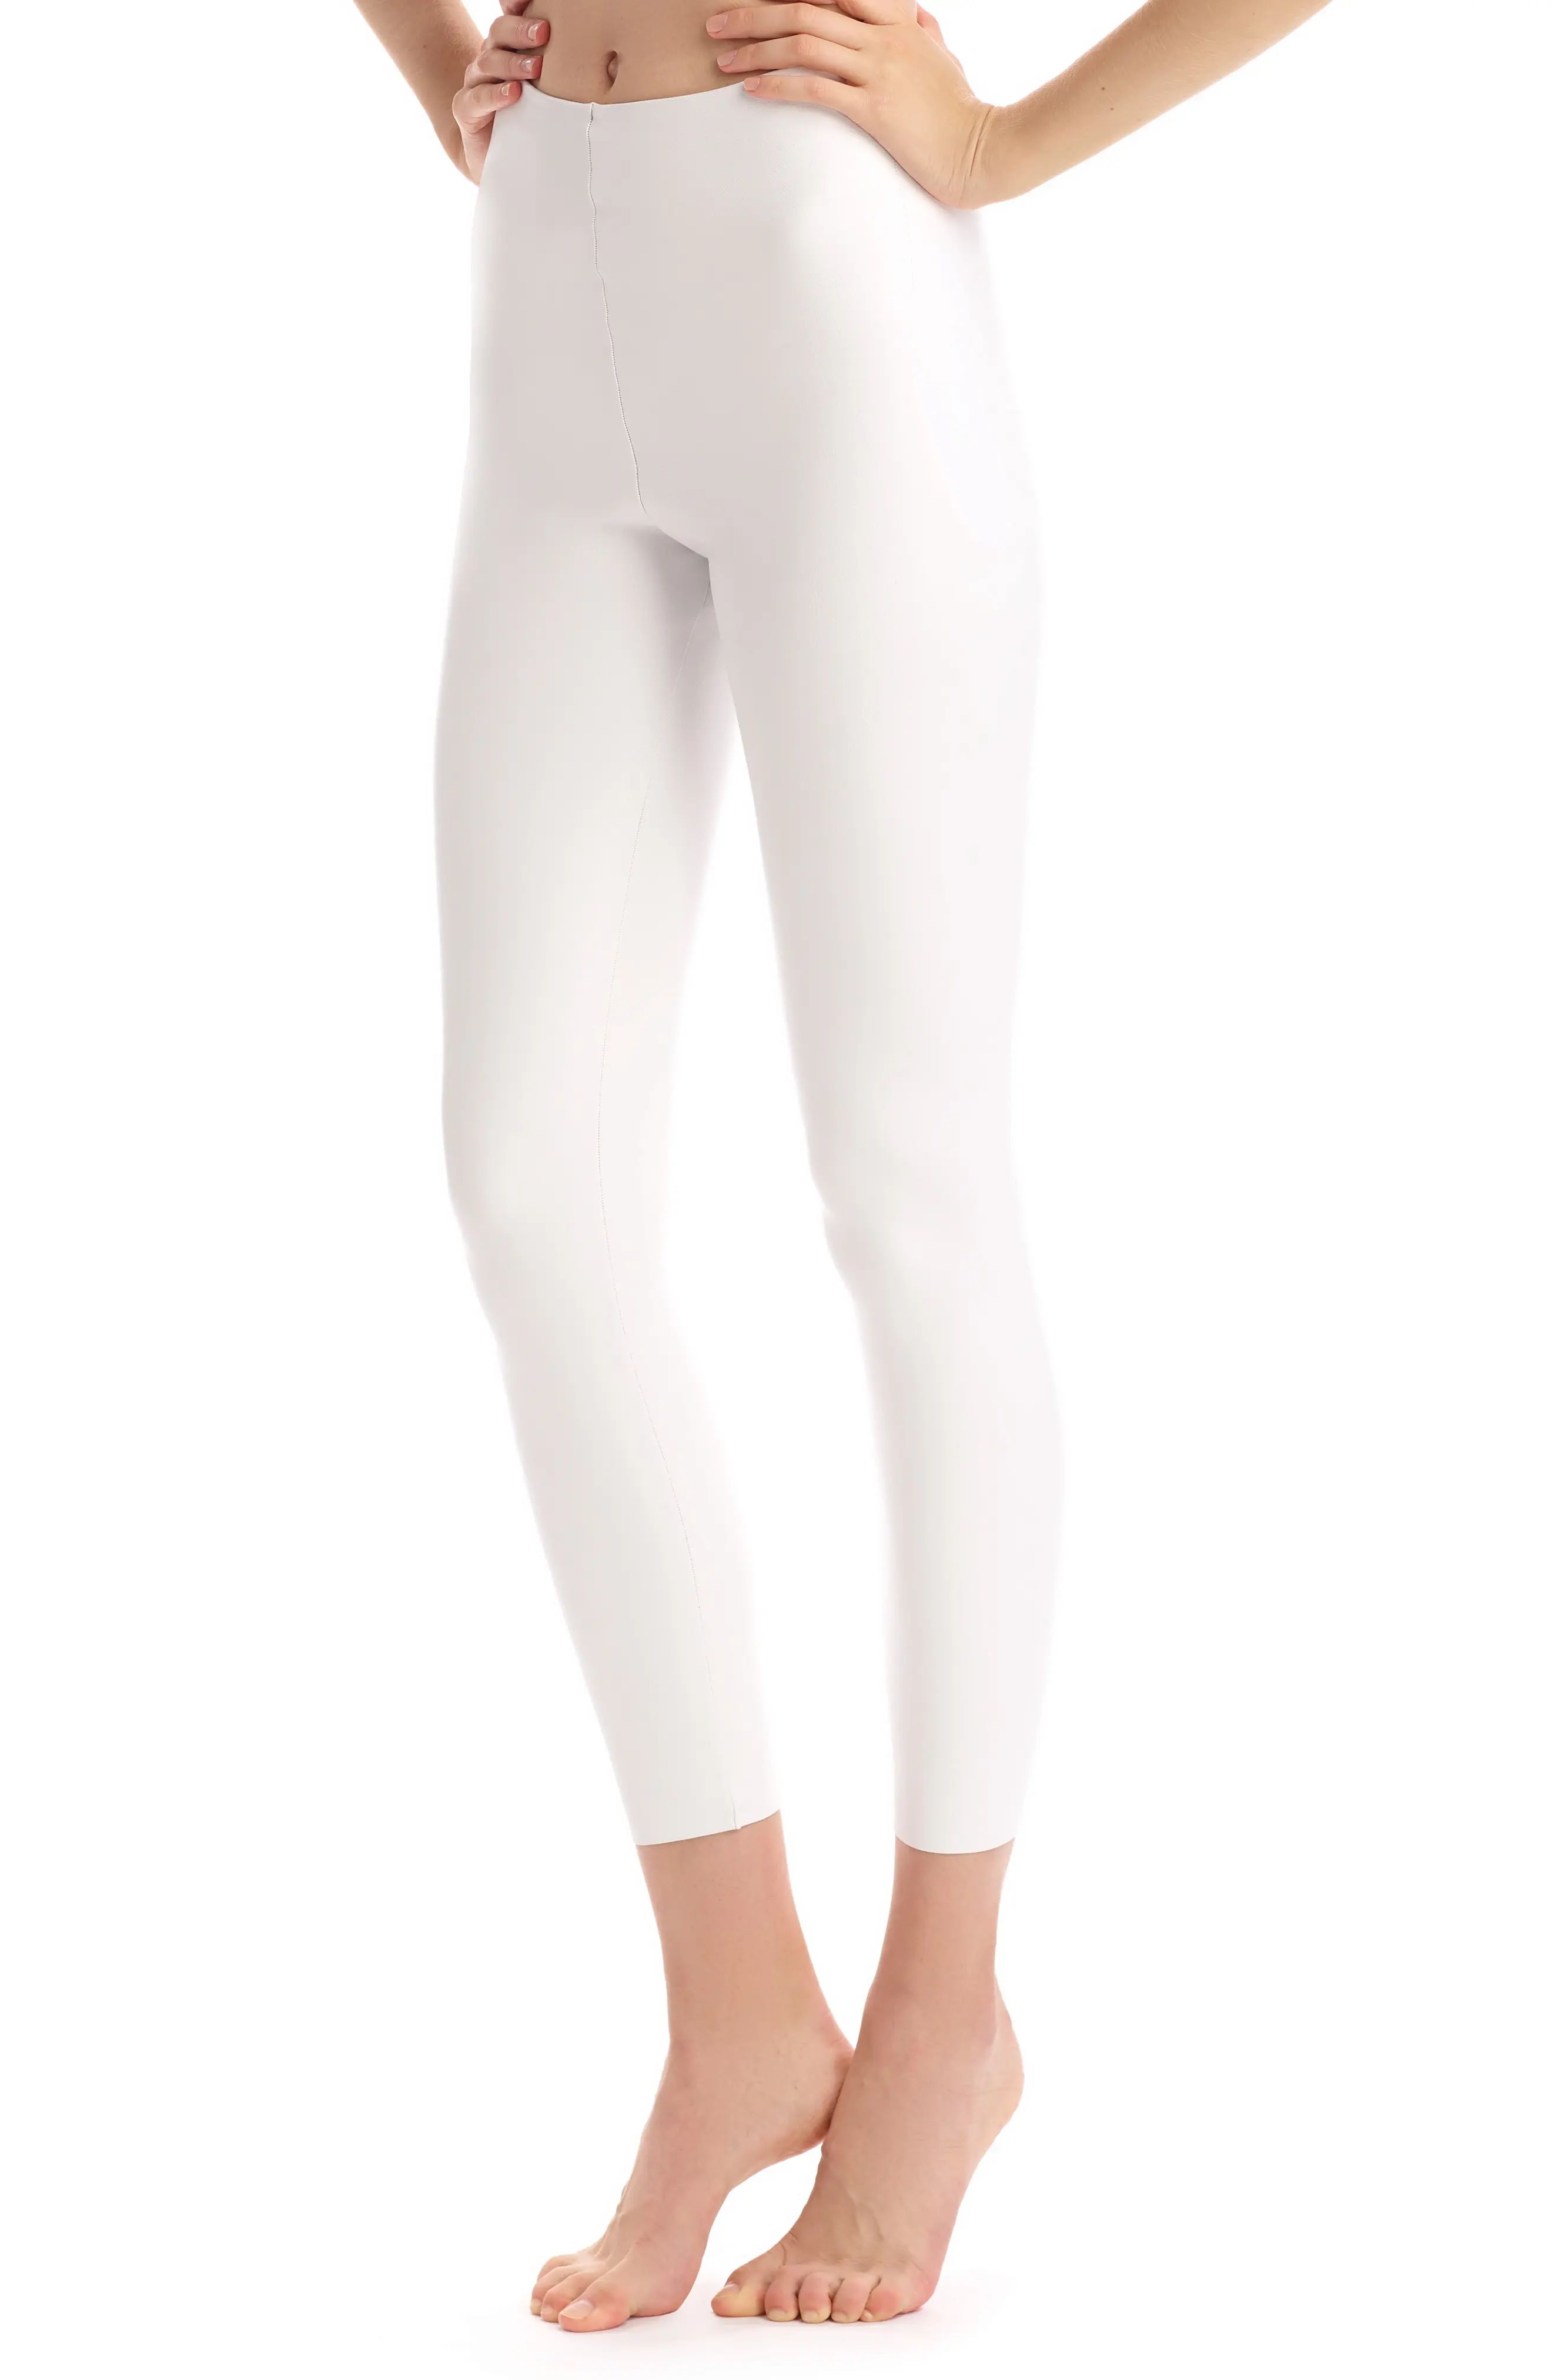 Commando Control Top Faux Leather Leggings in White at Nordstrom, Size X-Large | Nordstrom